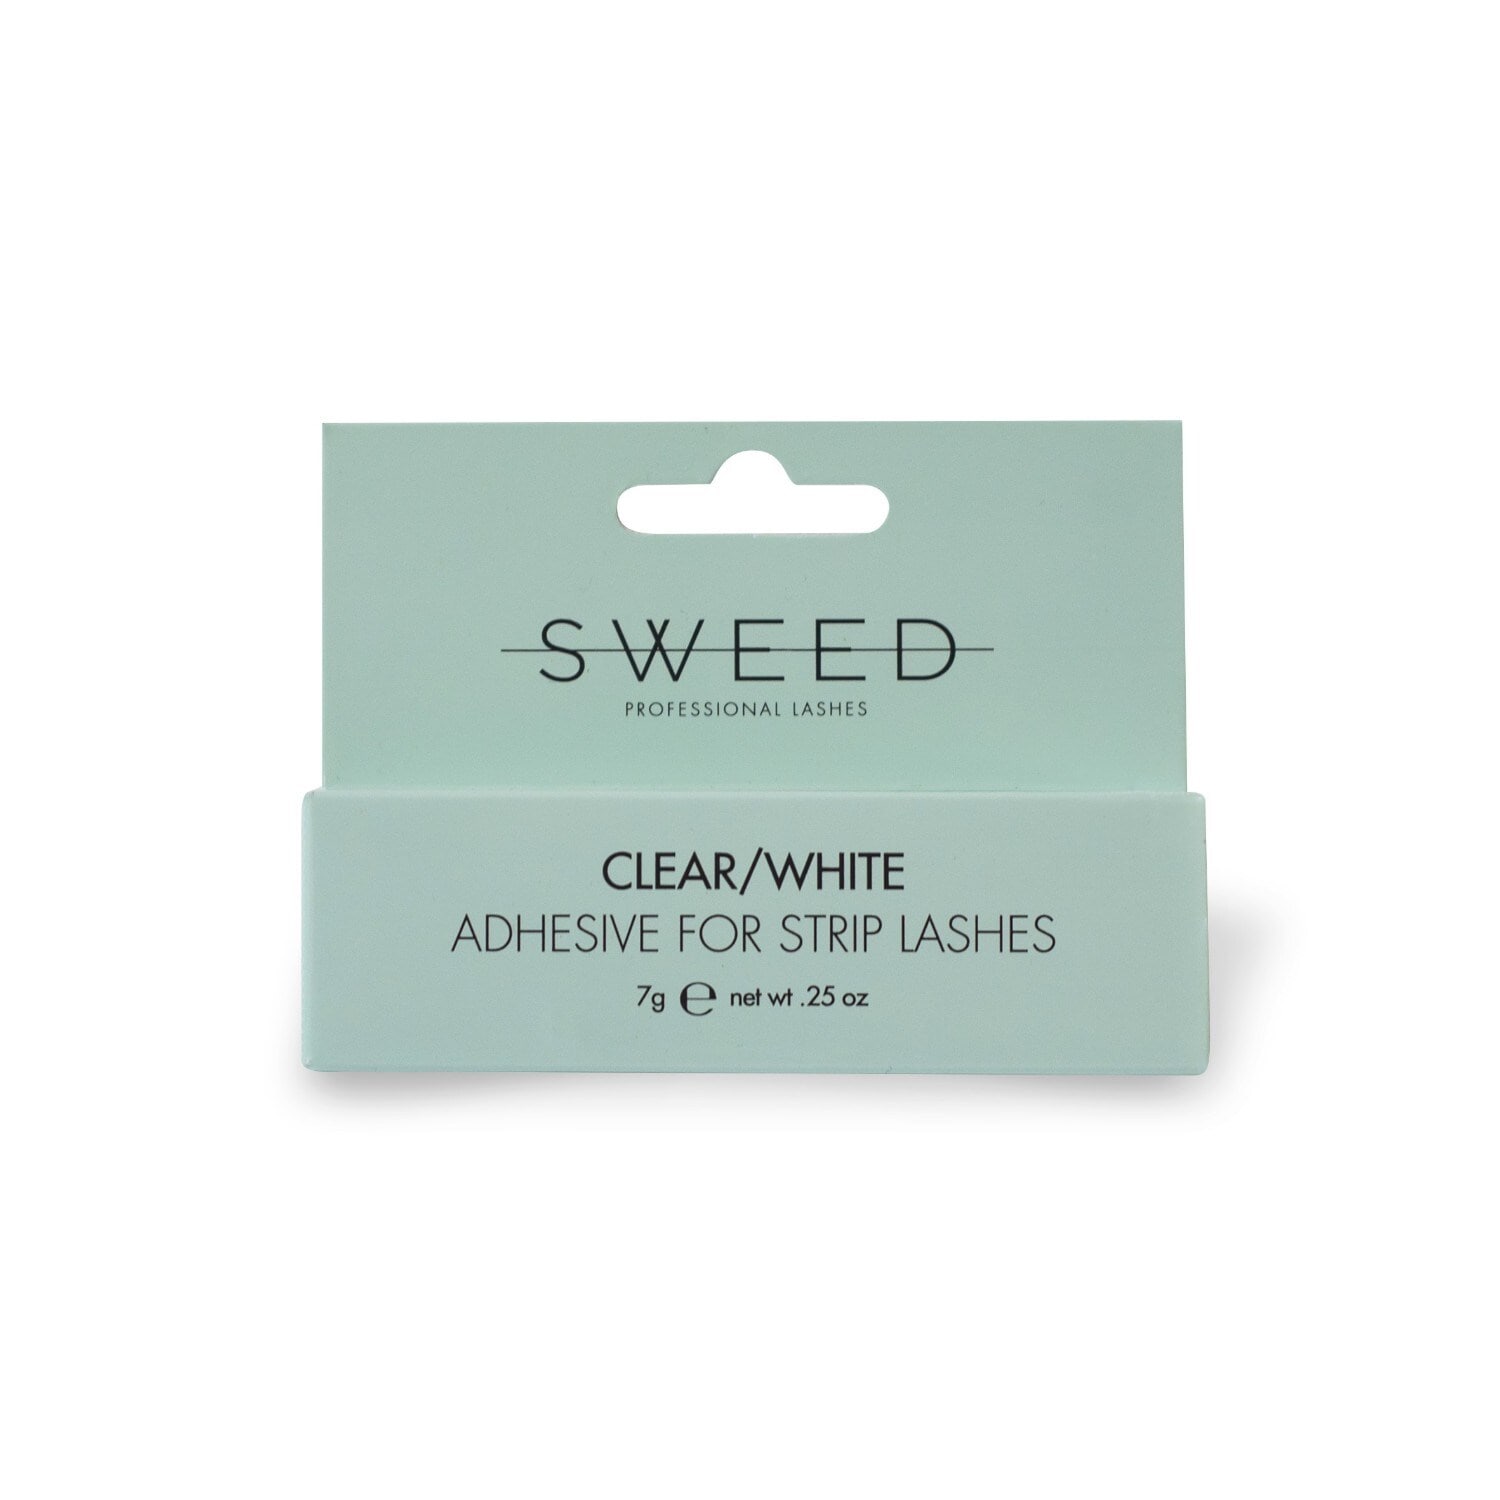 Sweed Adhesive for Strip Lashes Clear/White